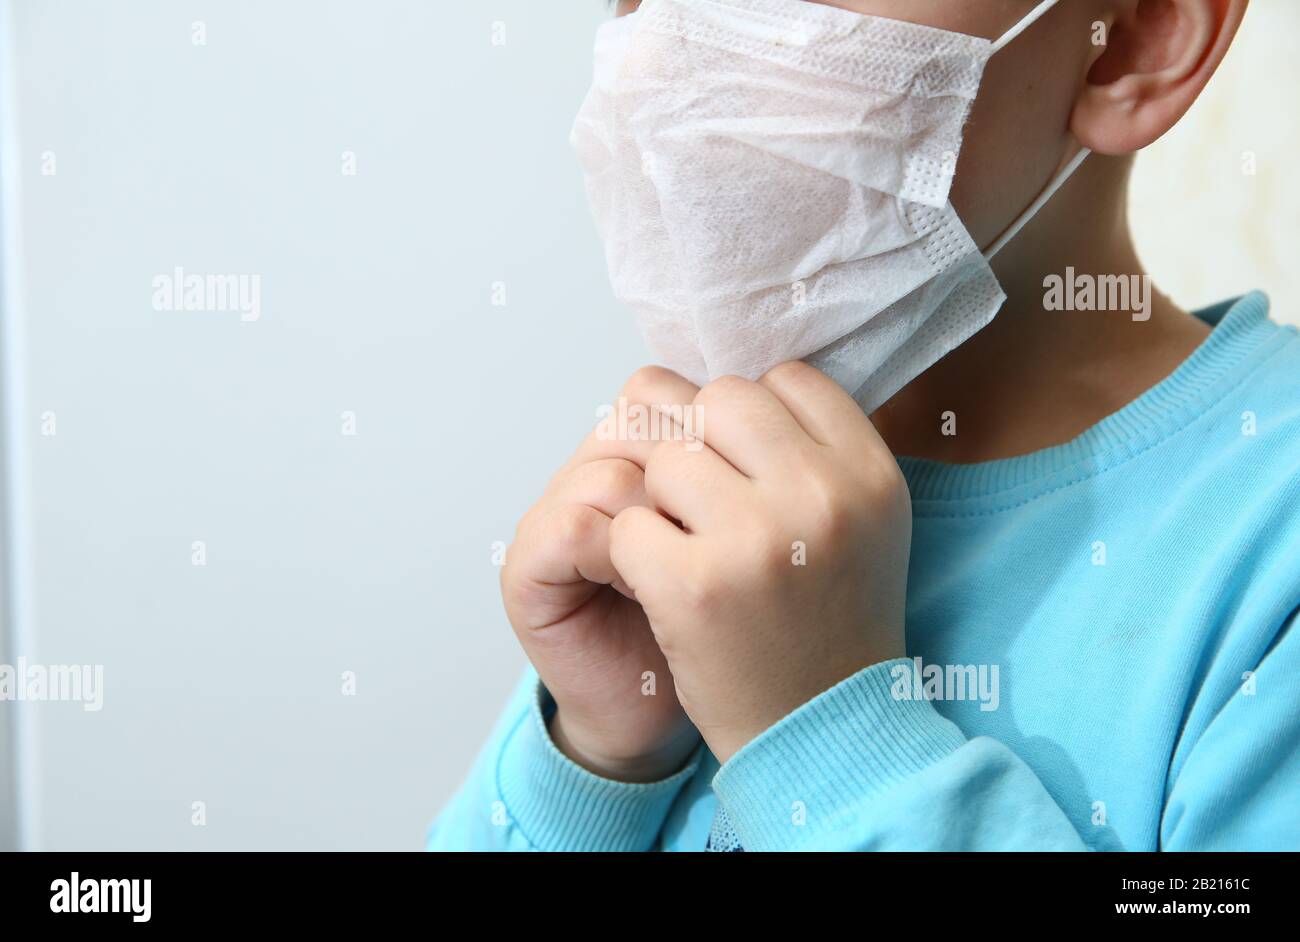 surgical mask kids